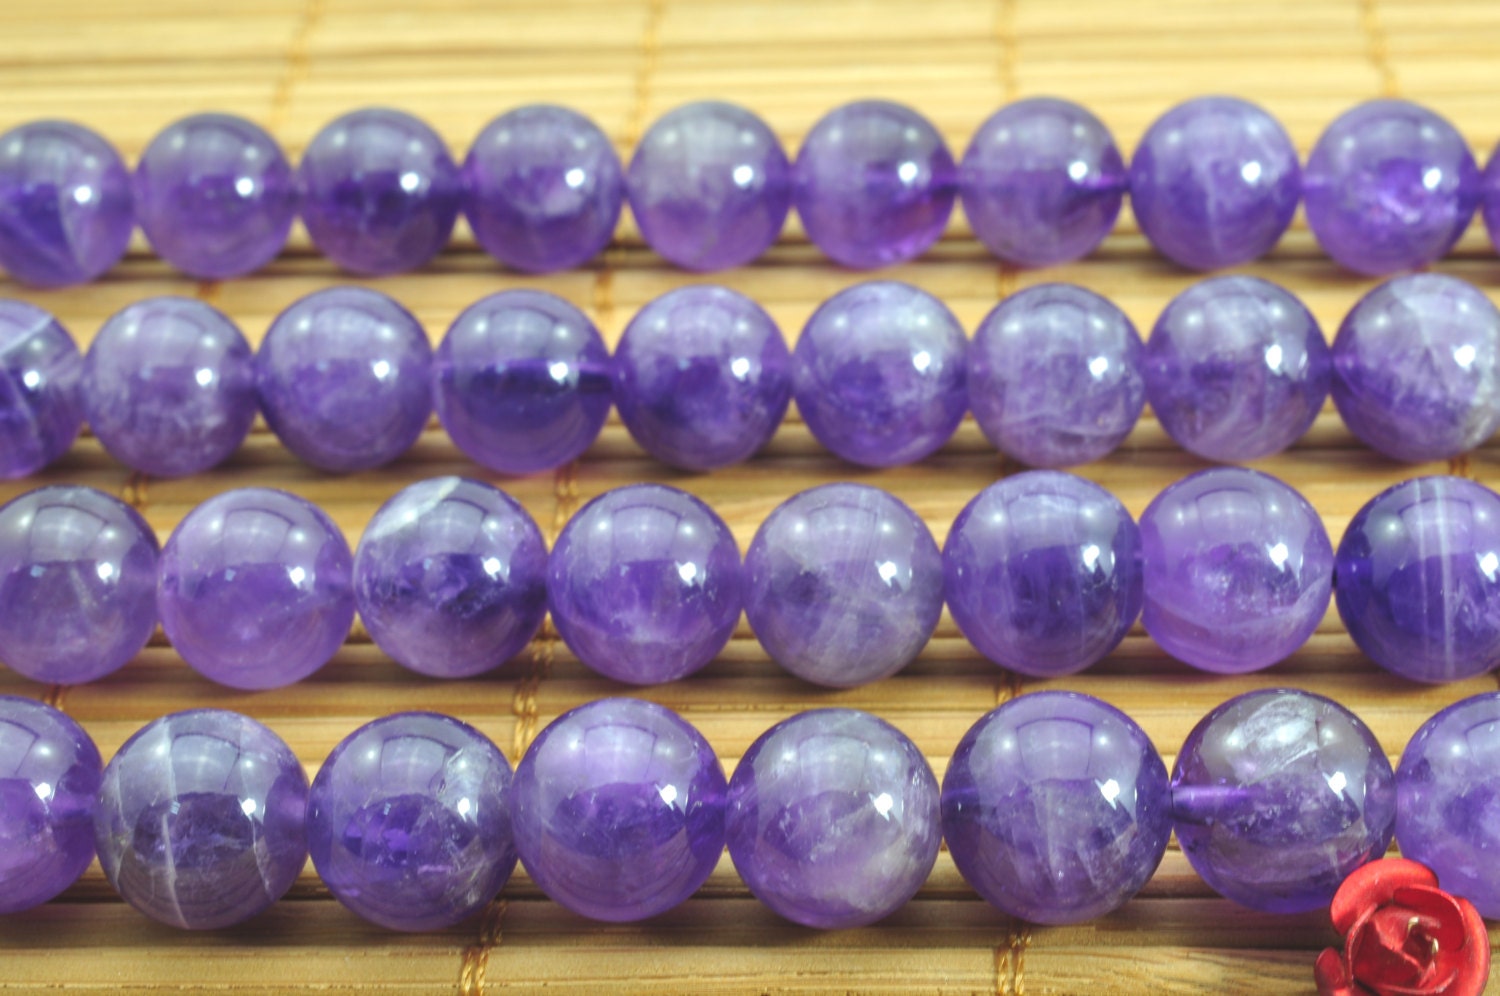 38 pcs of Natural Amethyst smooth round beads in 10mm | Etsy